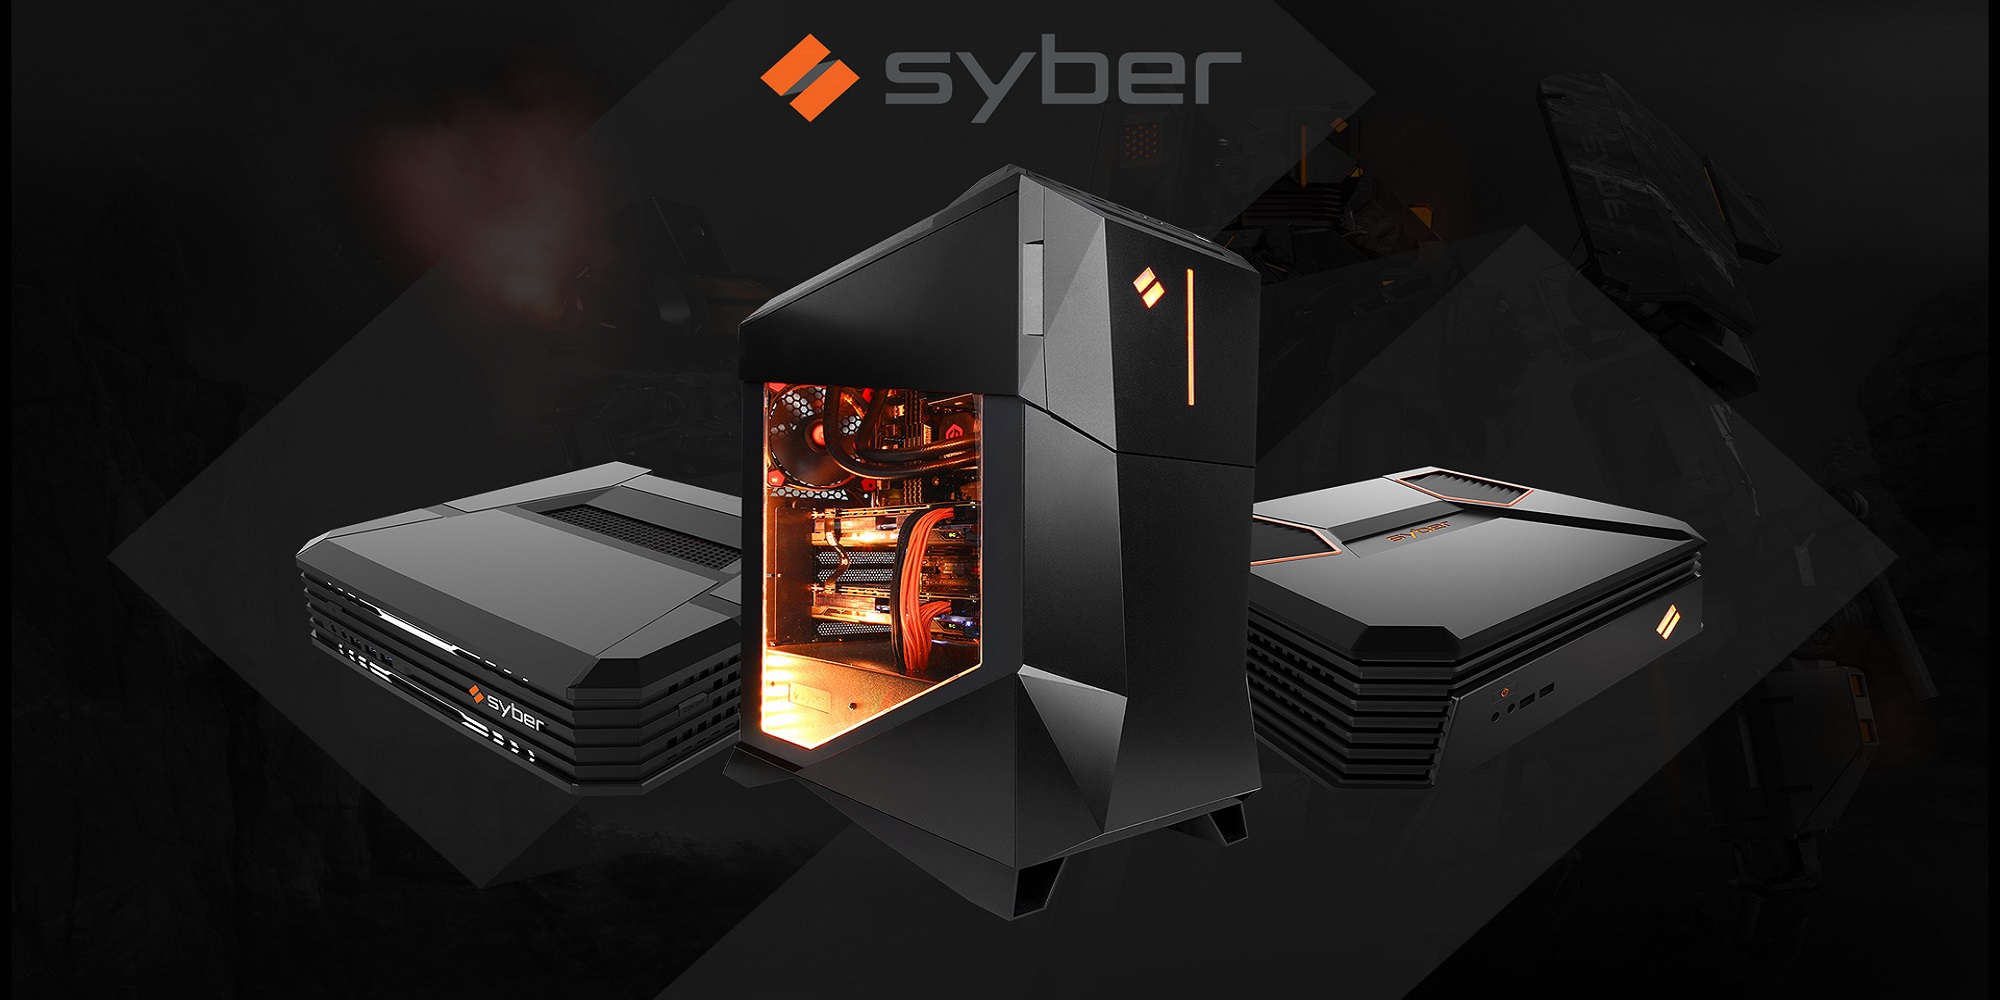 Proof in the Details: Syber’s Success at Customer Service and Quality Hardware